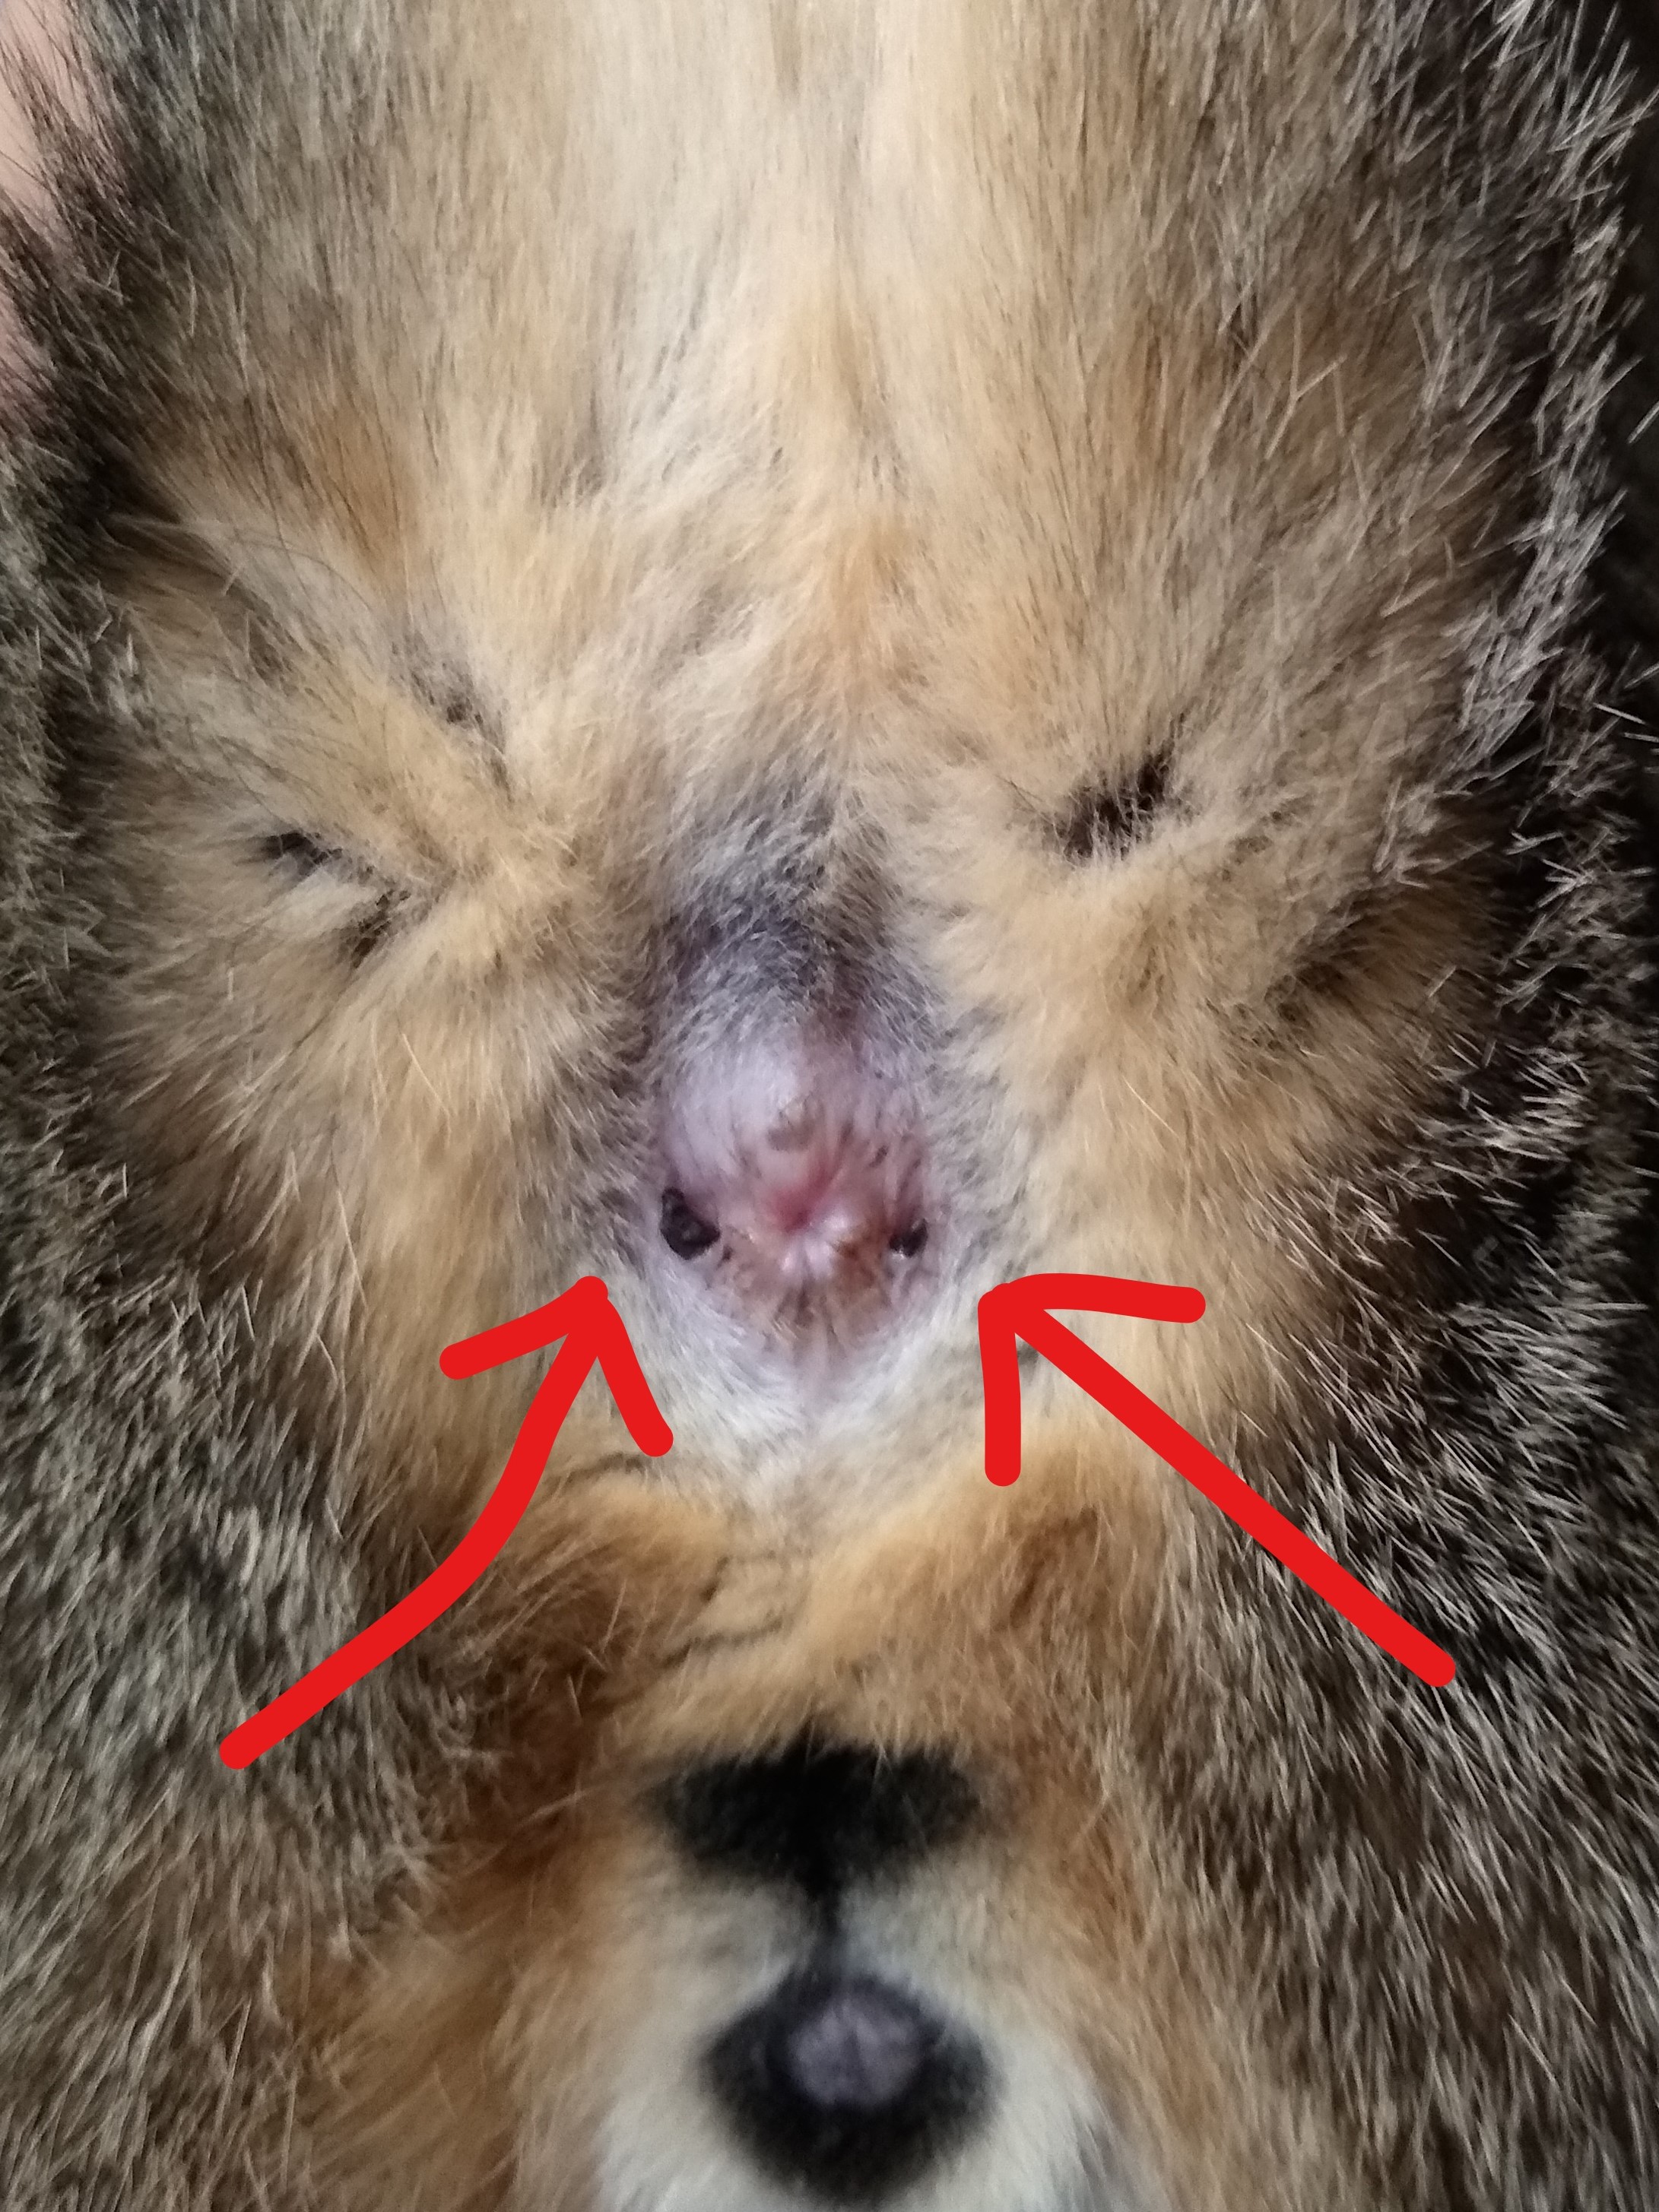 What Is On My Cat's Butt Hole? TheCatSite